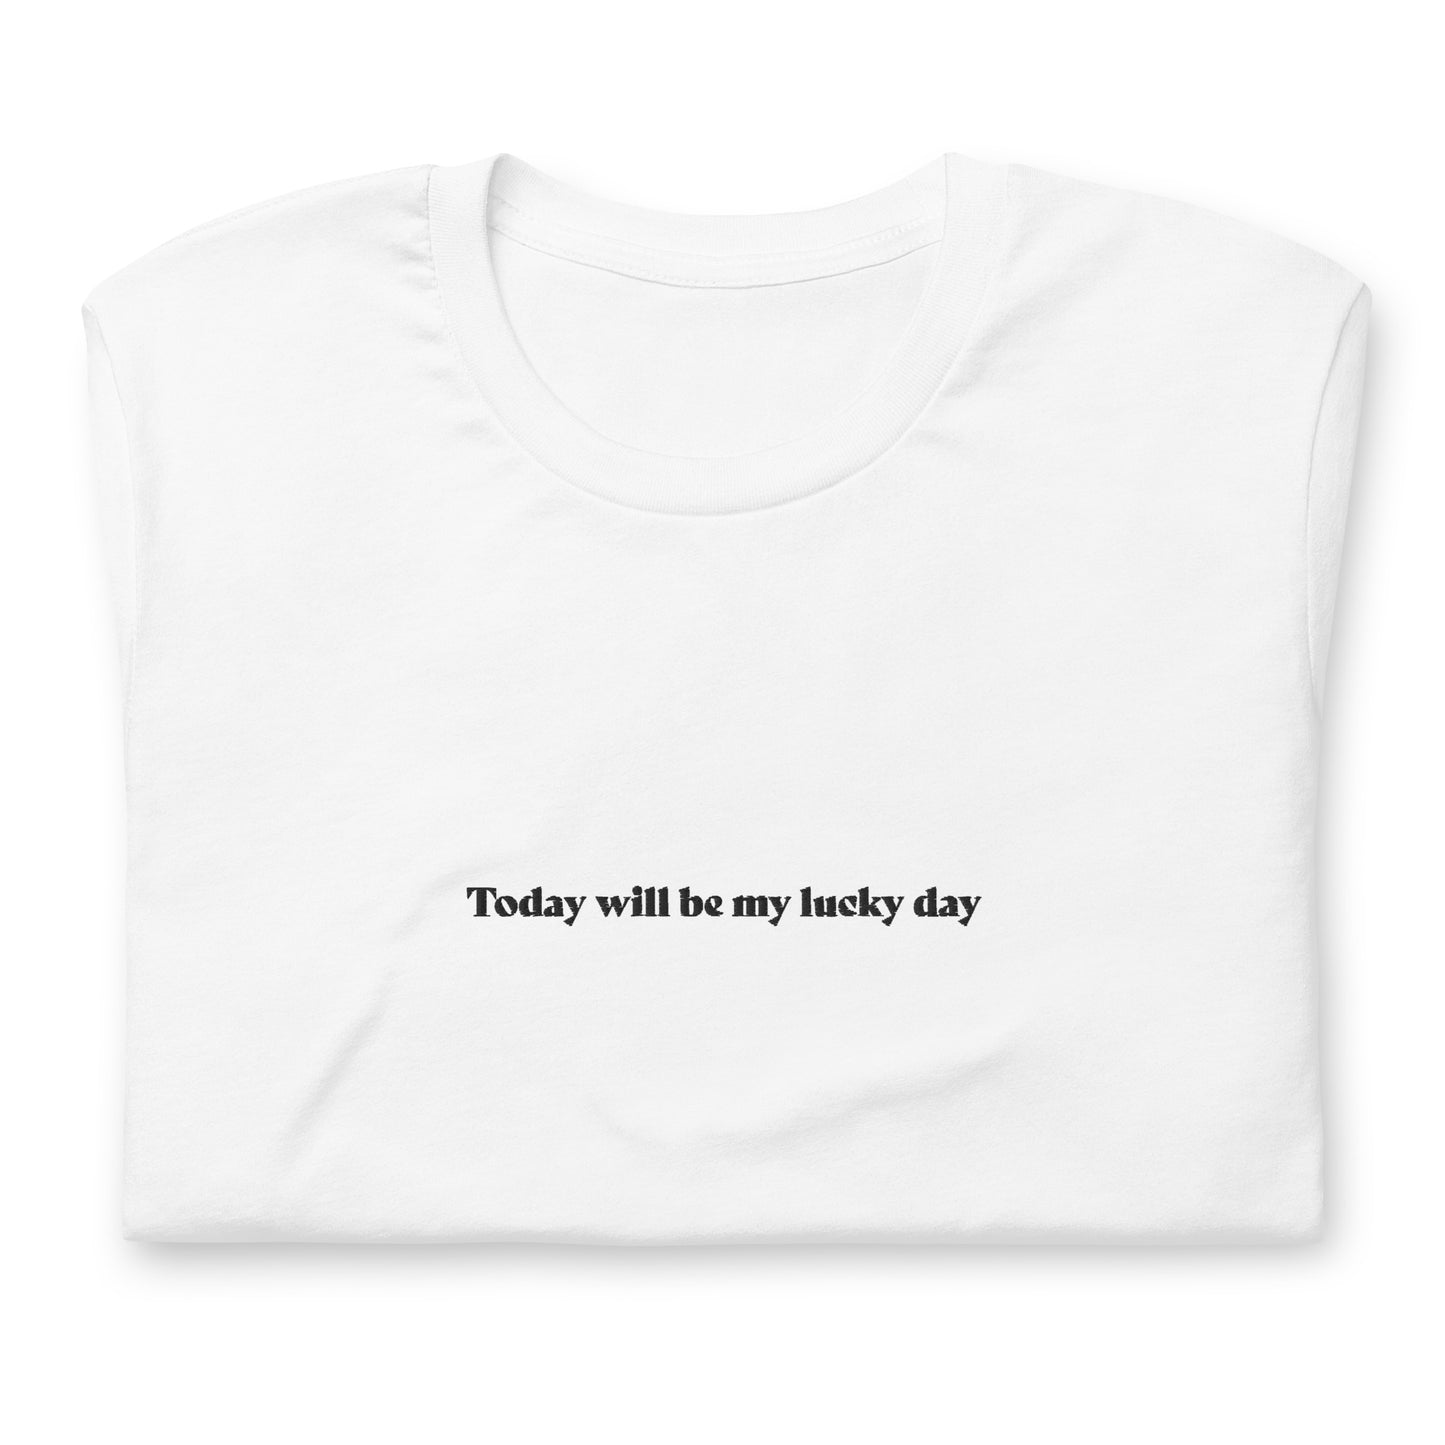 Today will be my lucky day - embroidered T-shirt